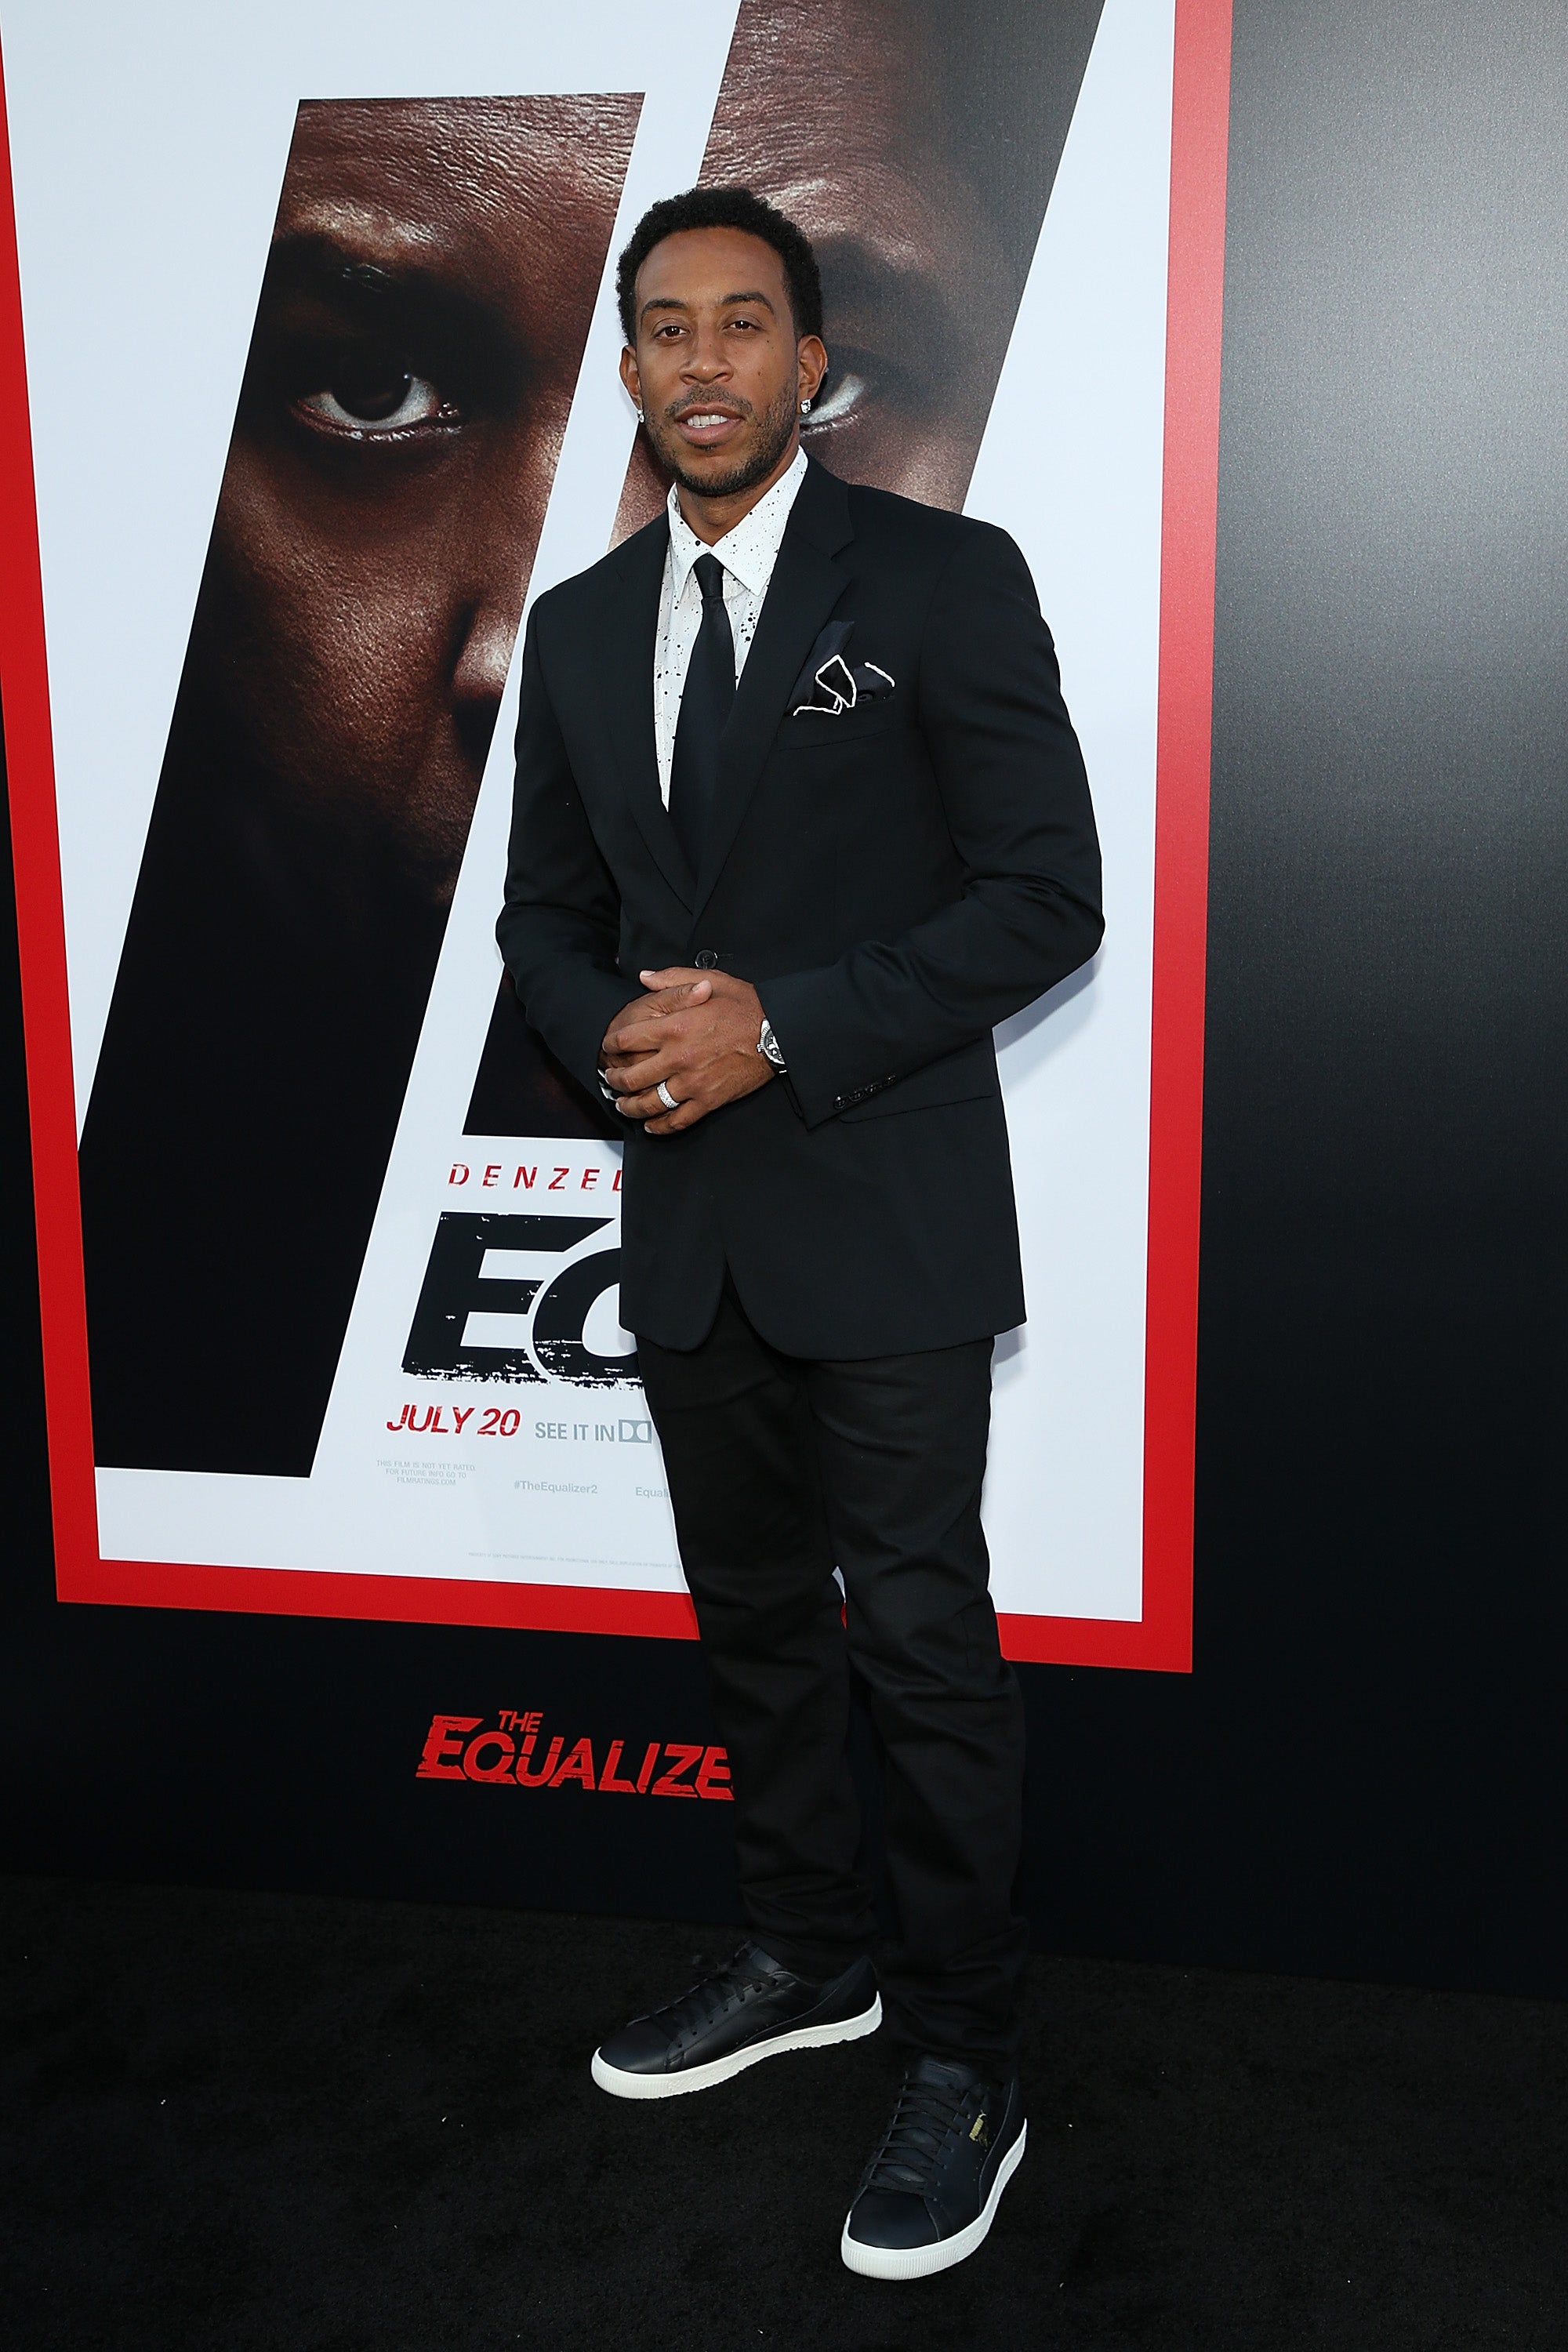 Denzel Washington And A Slew Of Celebrities Attend The 'The Equalizer 2' Premiere
